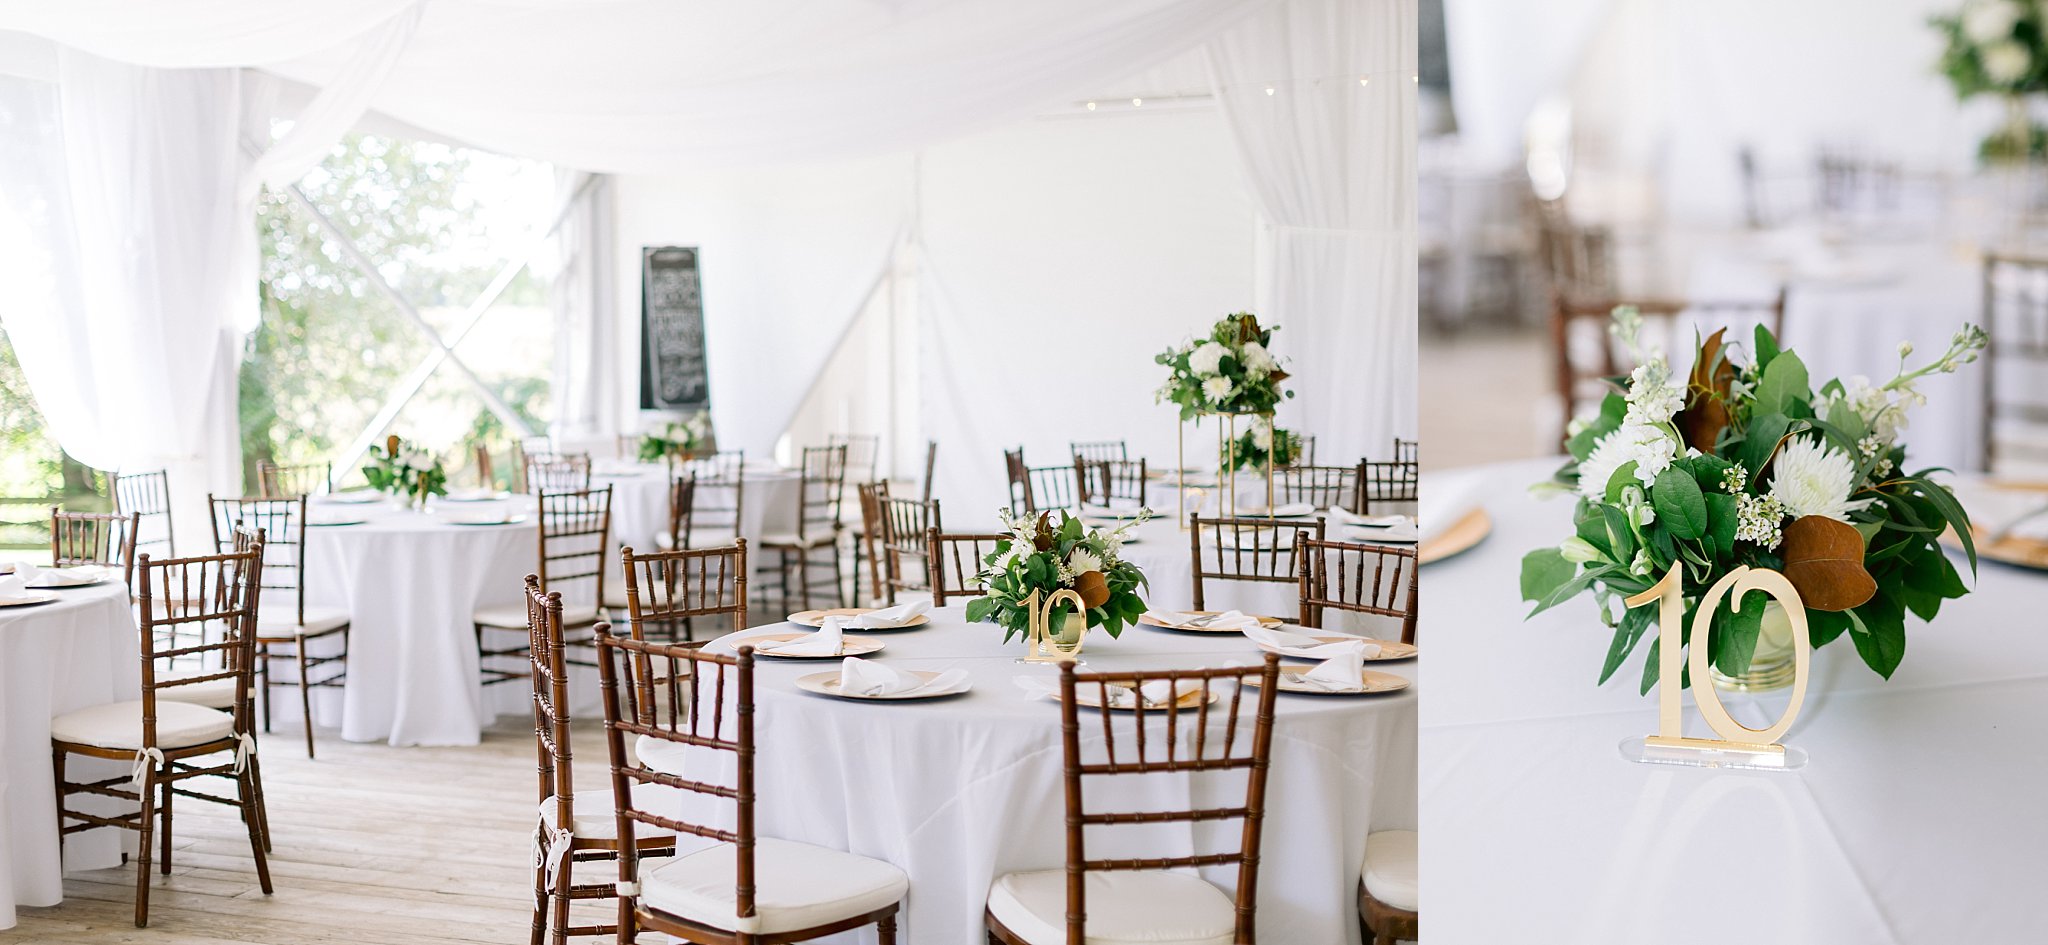 bright white reception tent space at walker's overlook for this summer wedding, decorated with pops of greenery and gold